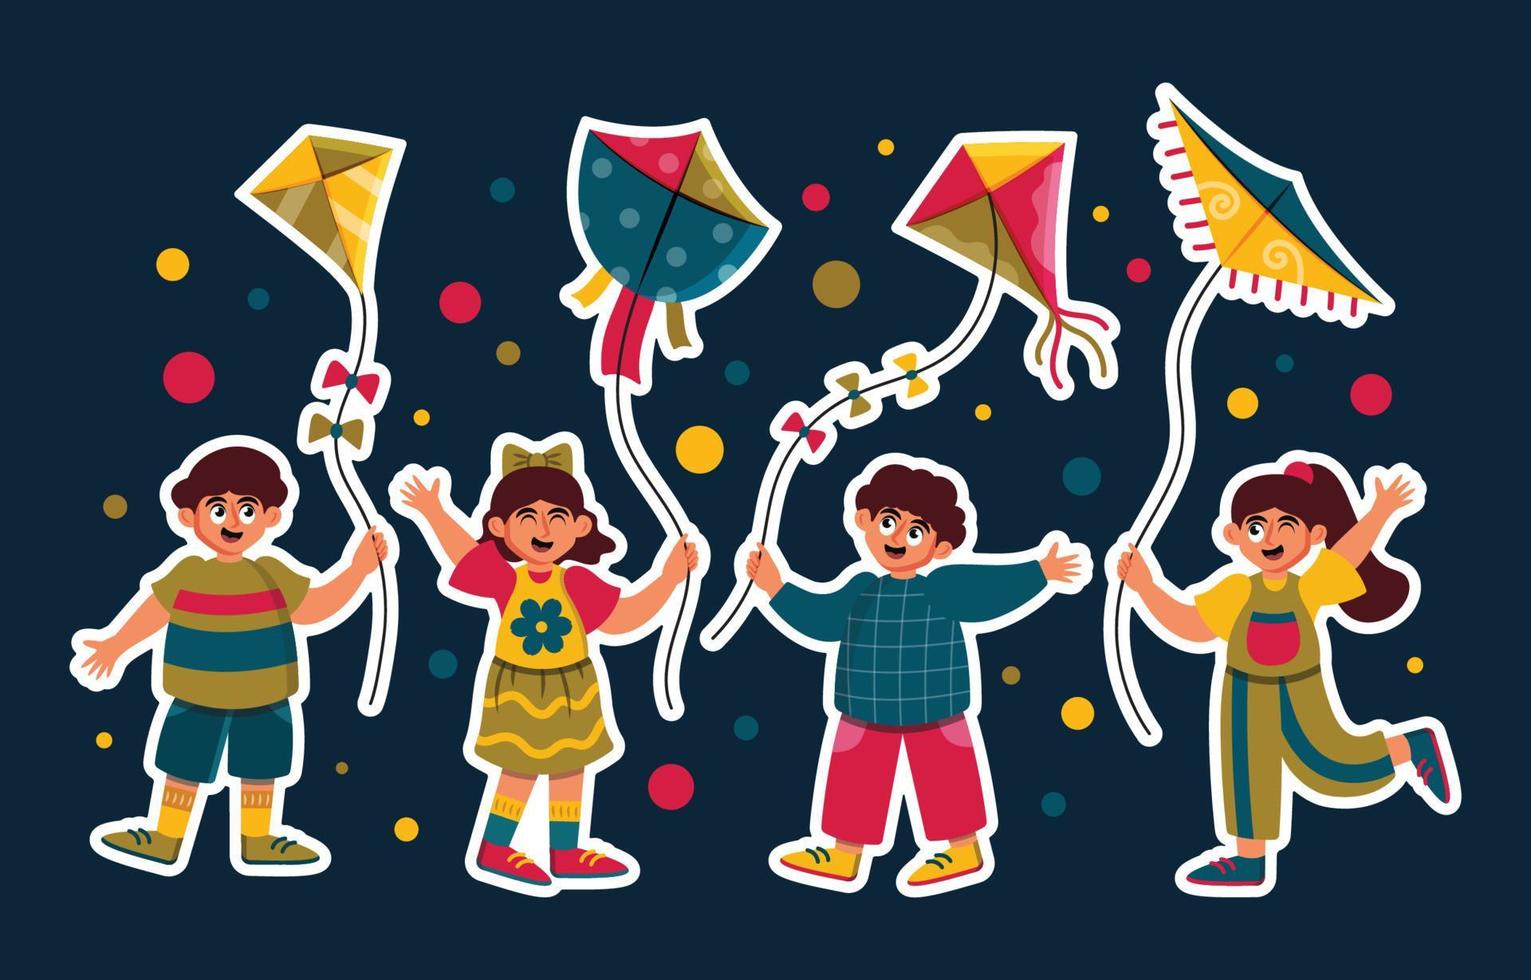 Colorful Happy Children Playing Kites Sticker Template Set vector